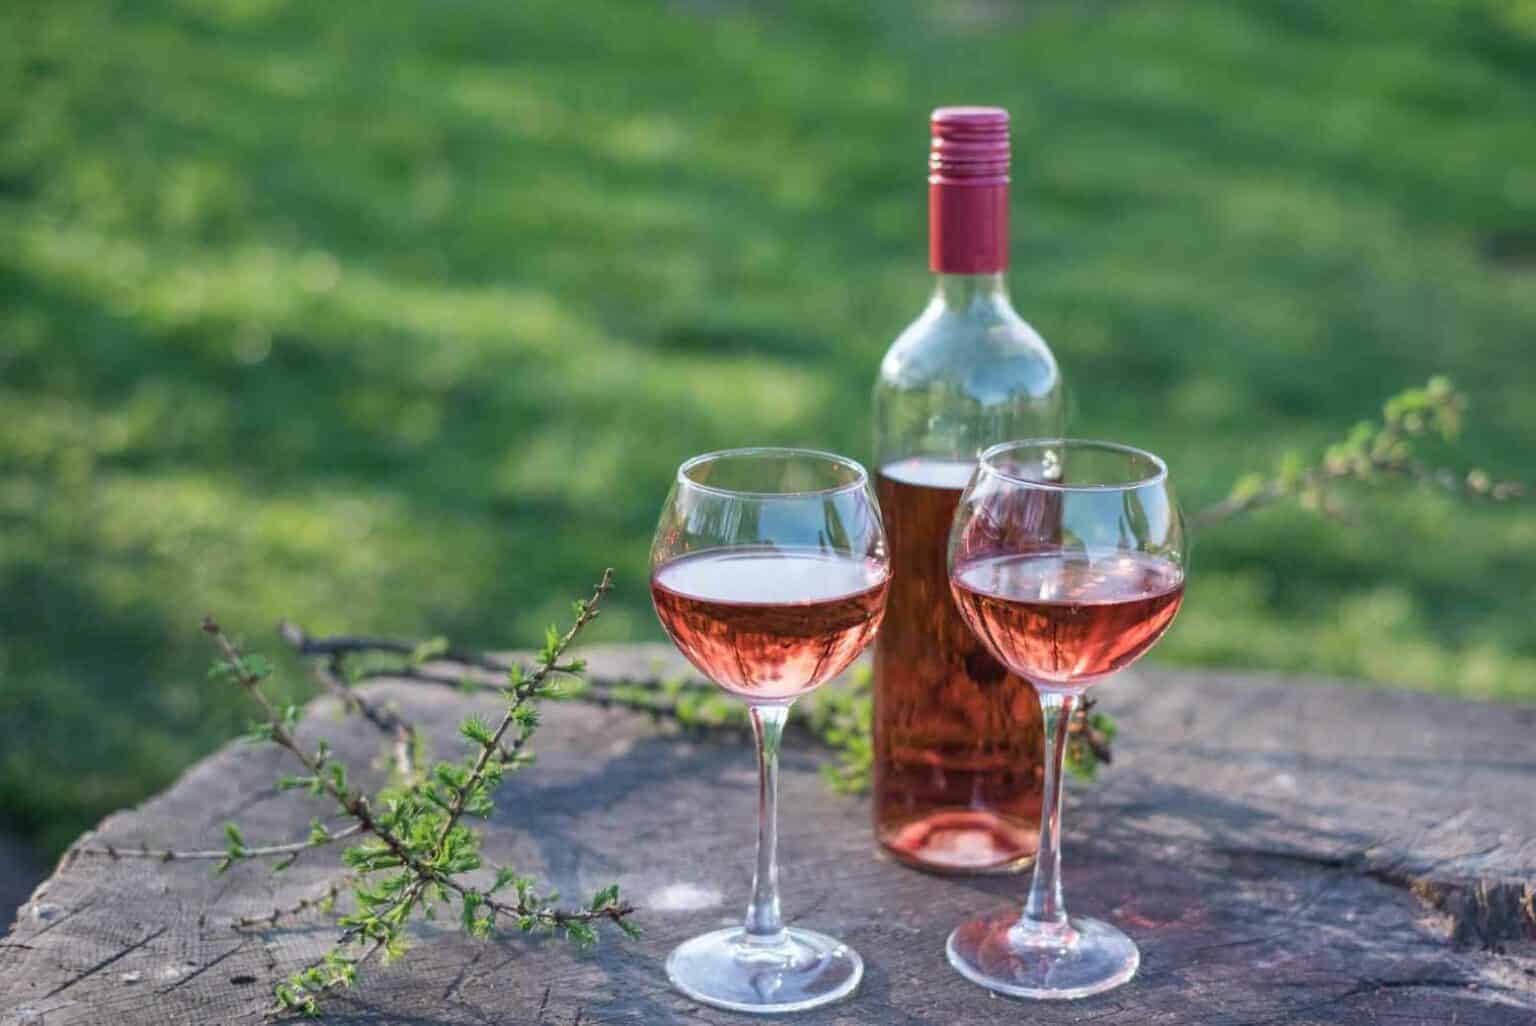 Taste-and-Appearance-of-White-Zinfandel-Wine